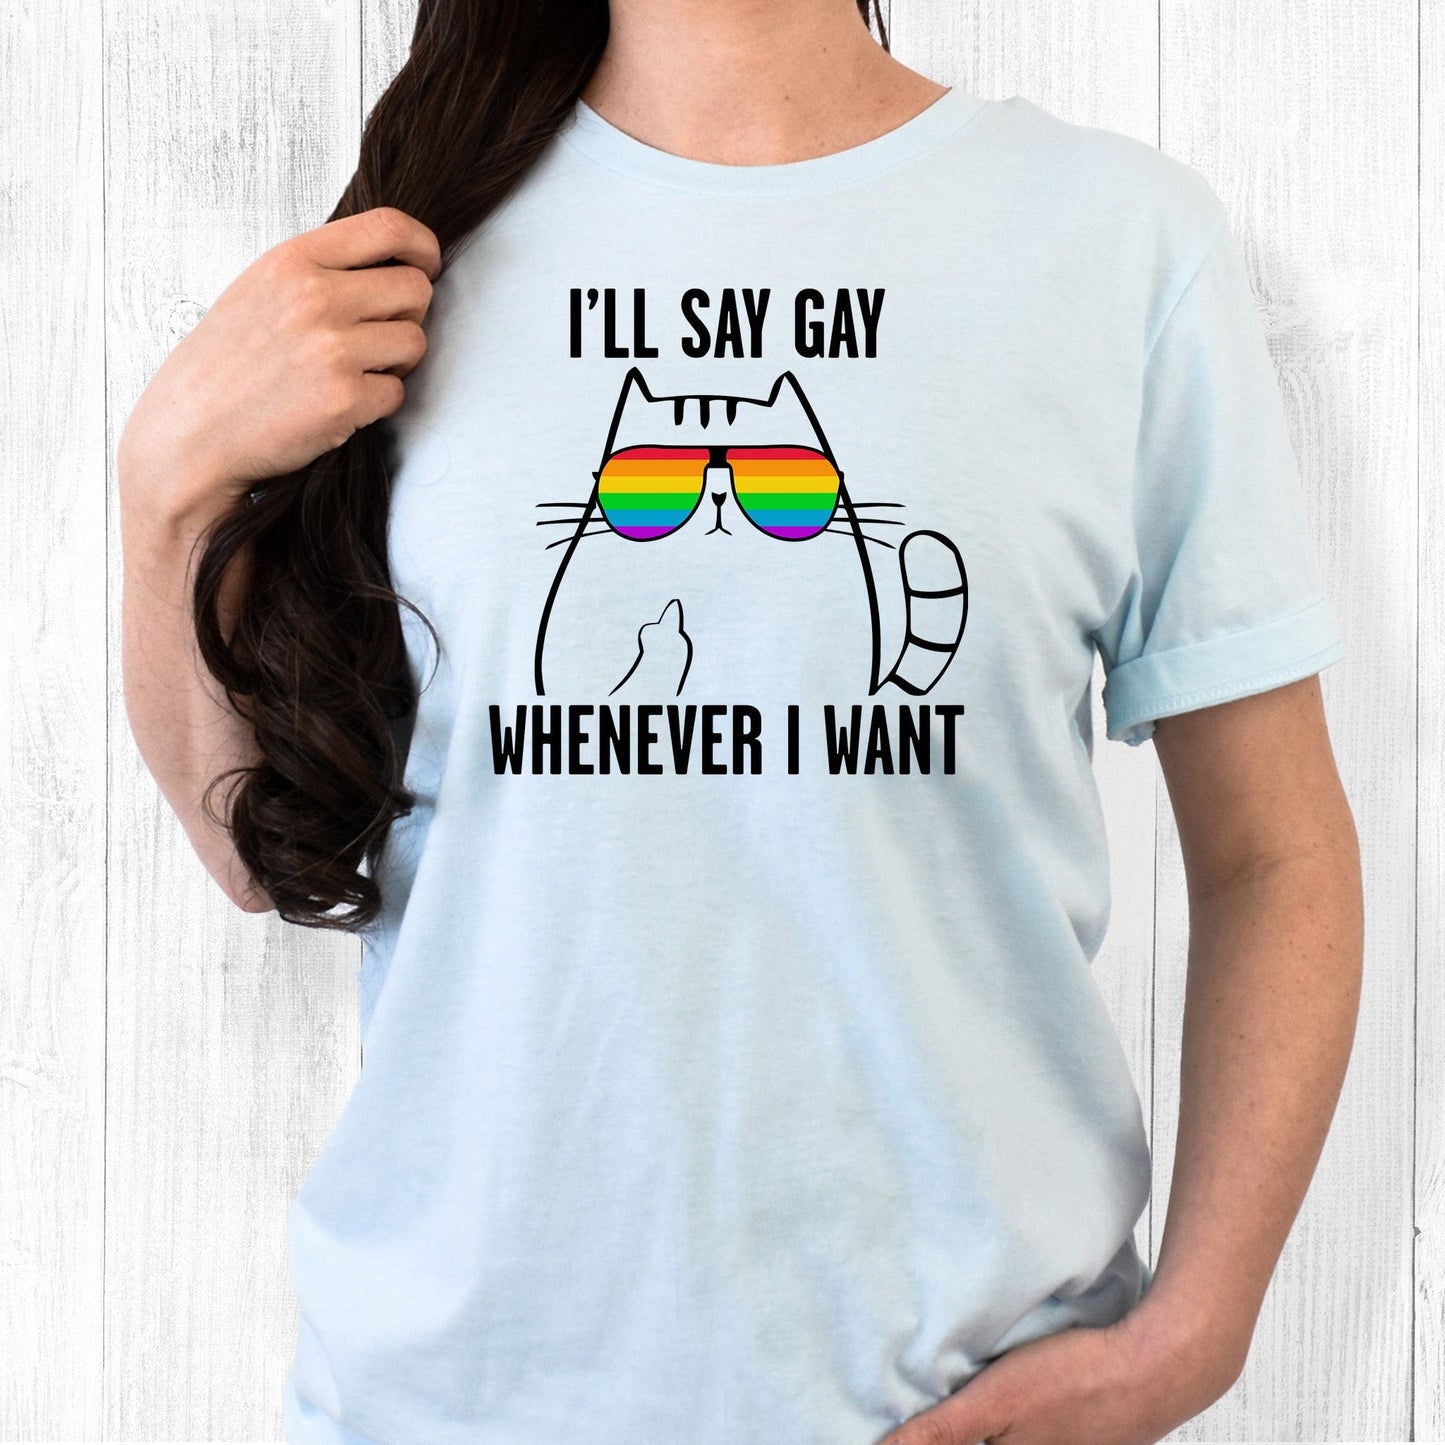 Heather Ice Blue color unisex t-shirt with a graphic of a cat wearing rainbow sunglasses. The text says, “I’ll Say Gay Whenever I Want” with the words “I’ll say gay” above the graphic and the rest of the text below the graphic. The cat is also holding up its middle finger.